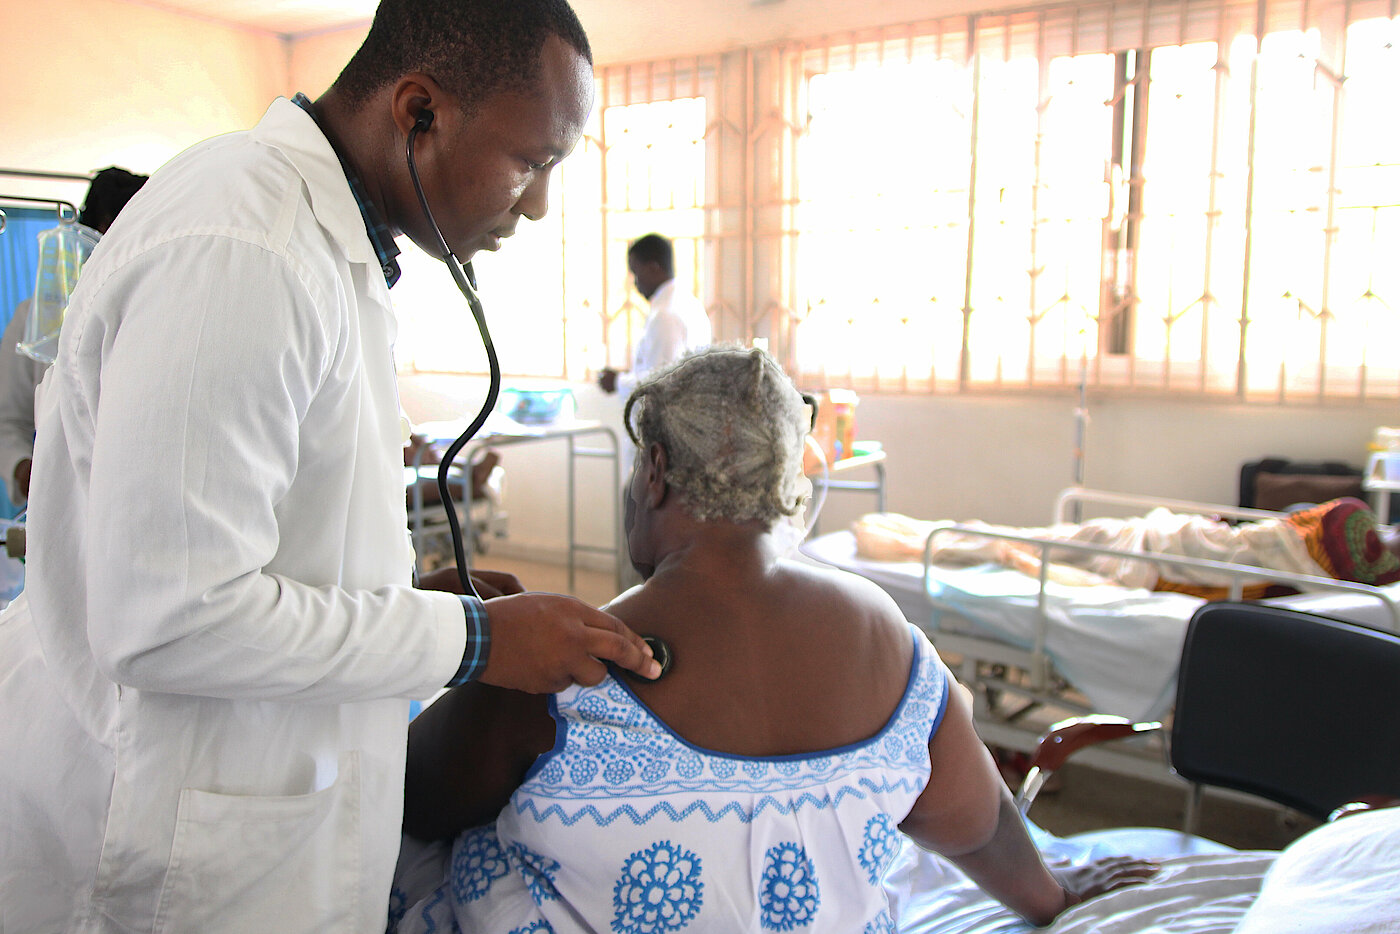 Photo: A doctor listening to a women’s back through a stethoscope in a doctor’s room. There are other people in the background.